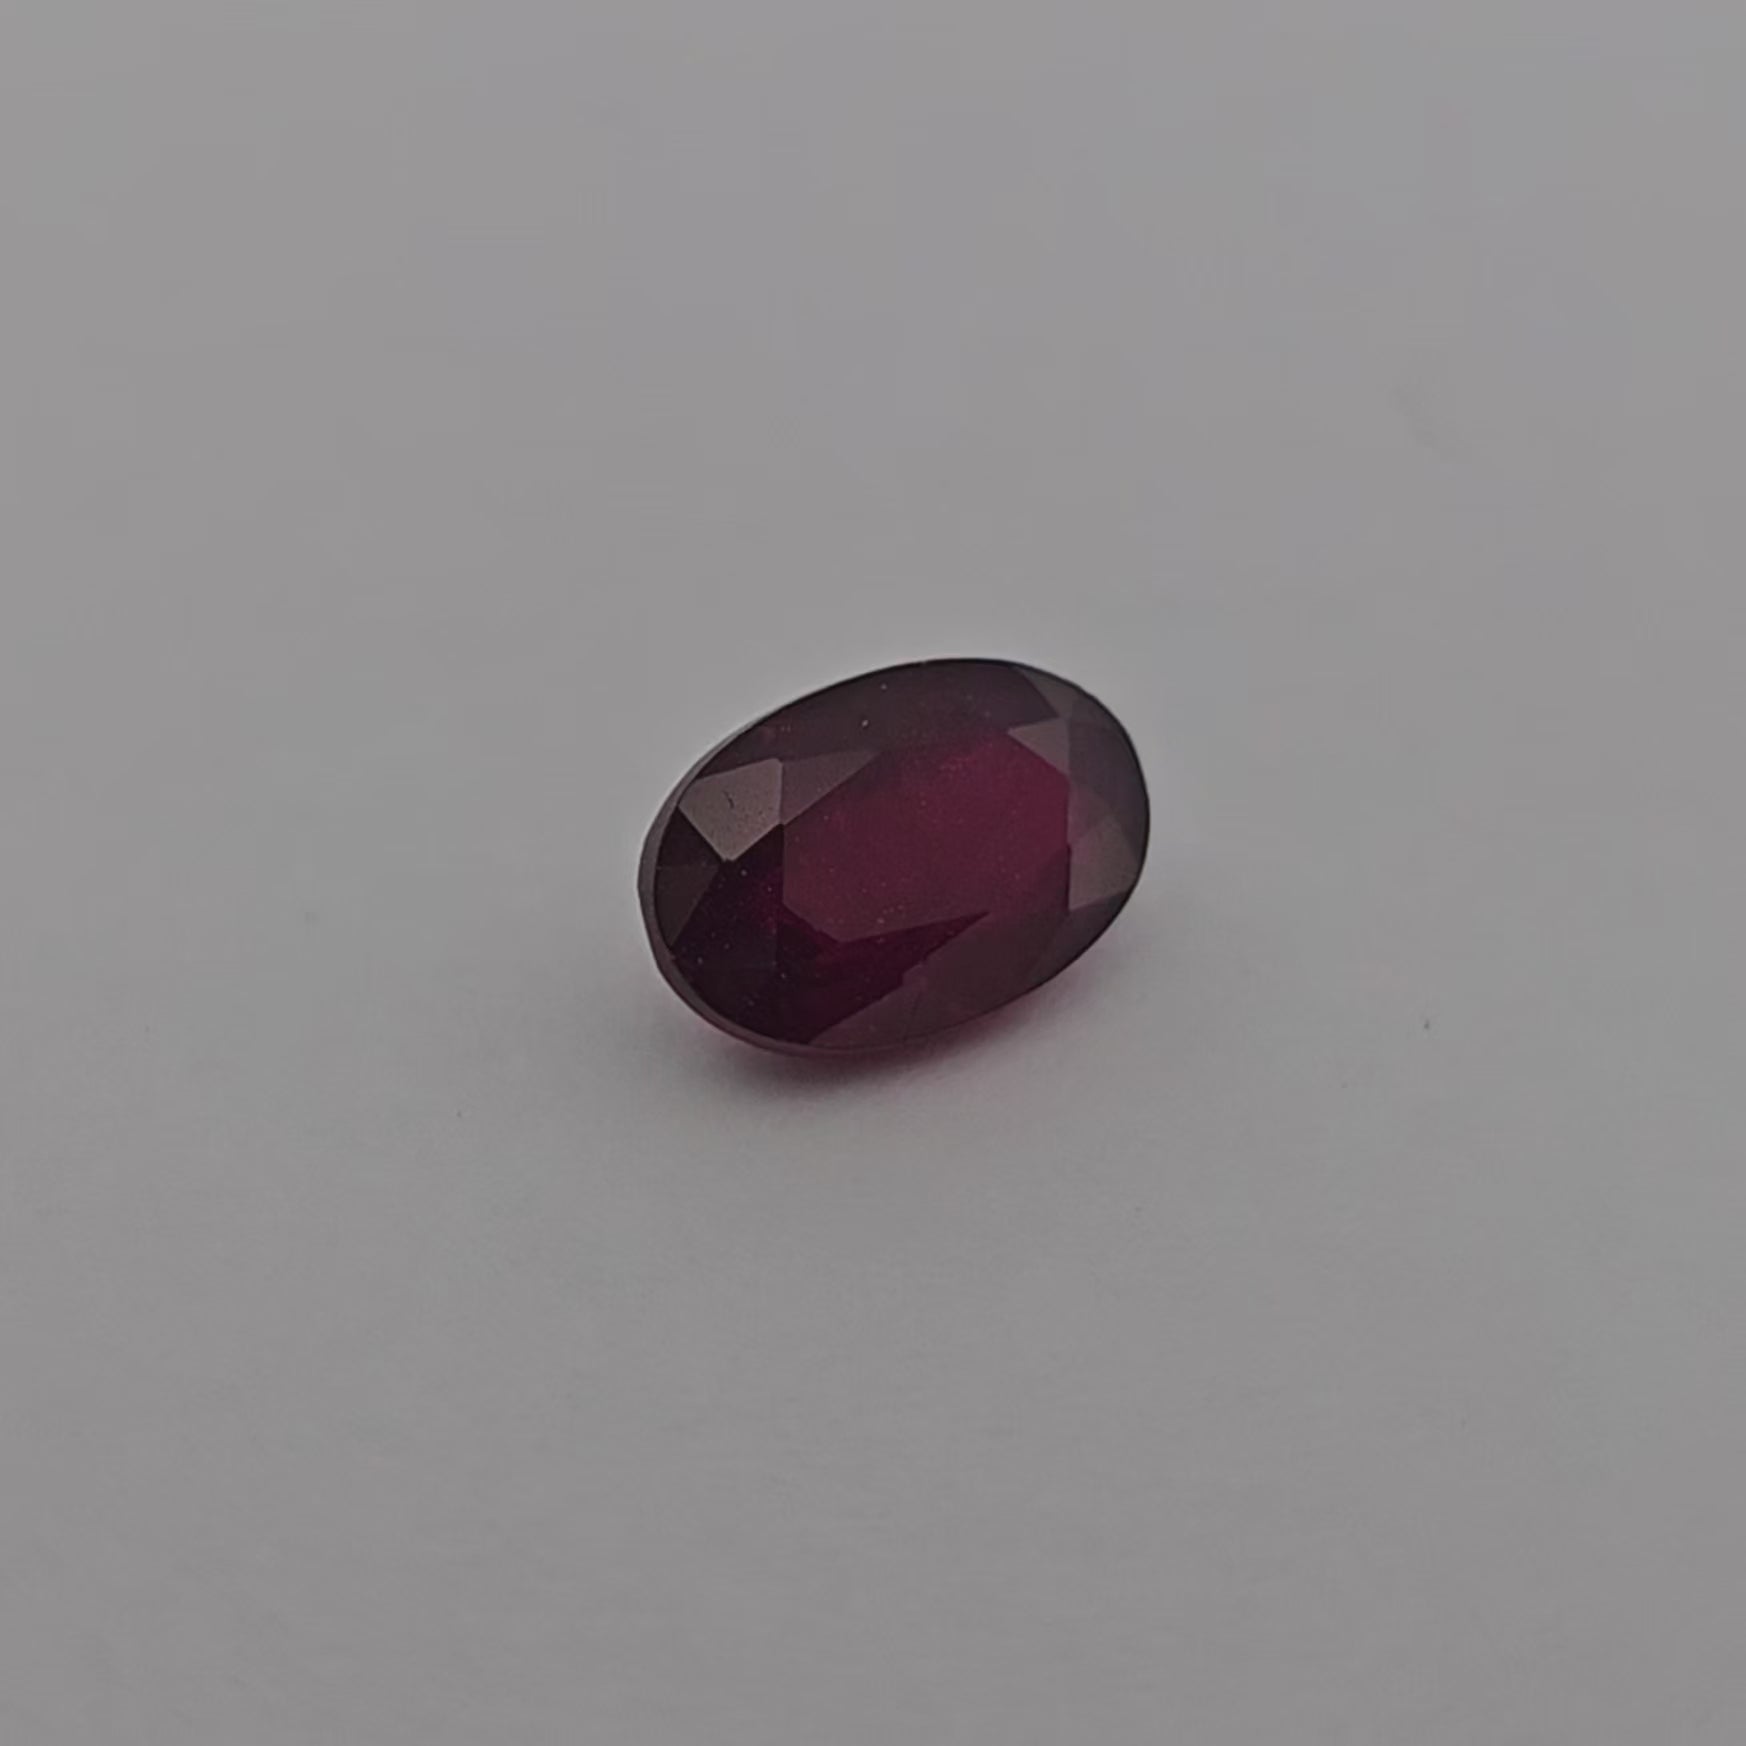 Natural Mozambique Ruby Manik Stone 1.96 Carats Oval Shape